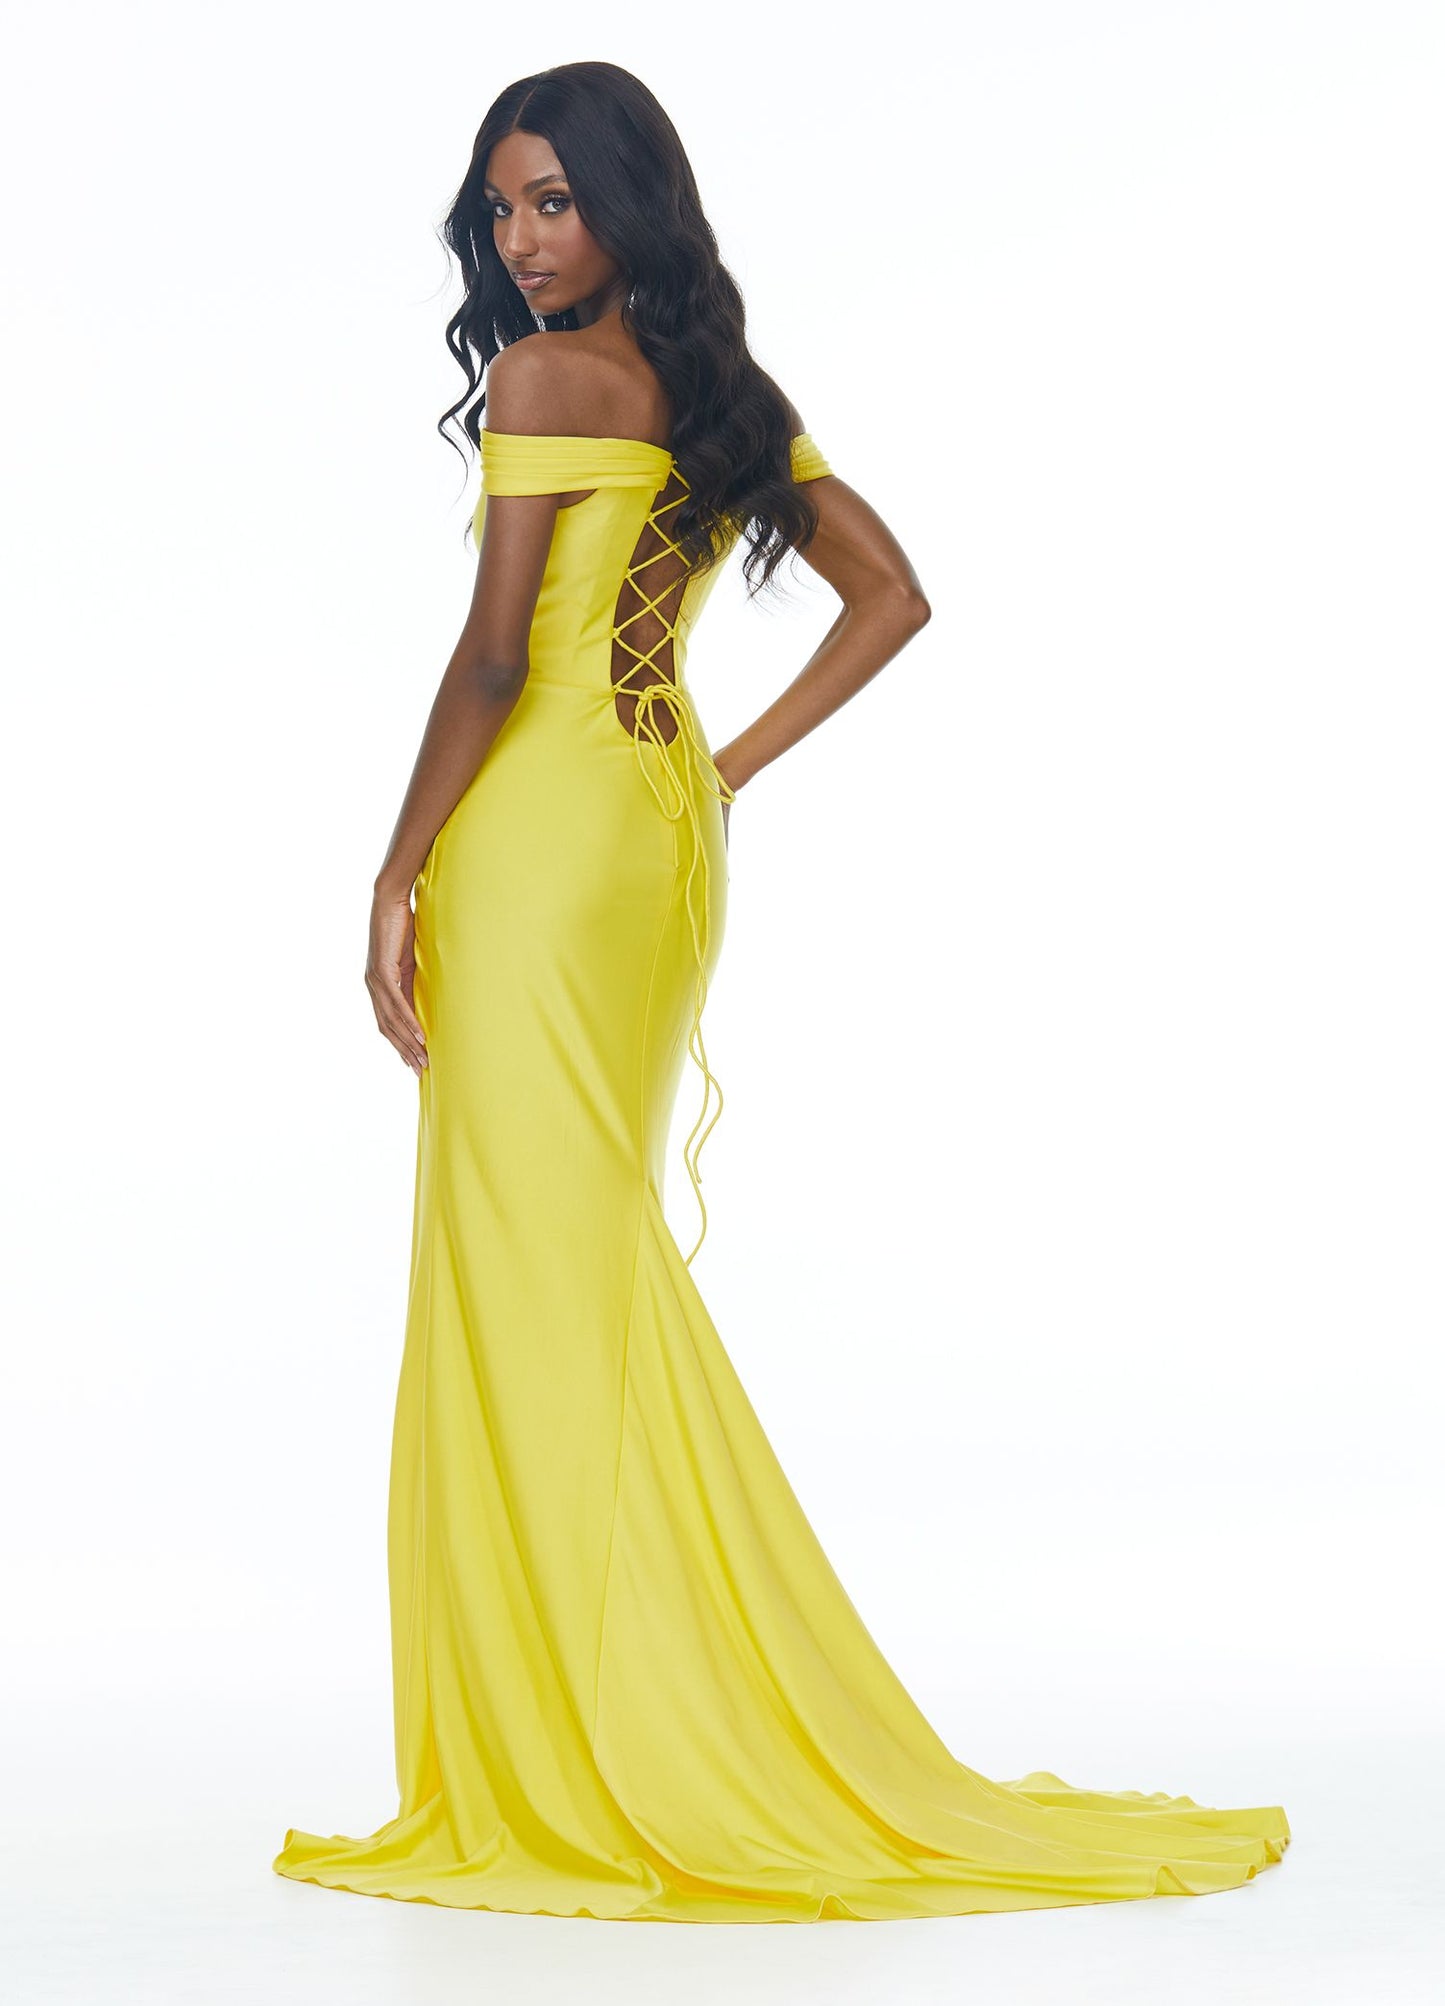 Ashley Lauren 11031 This jersey prom dress has a ruching along the off shoulder straps and waistline, crystal detailing, a modern cut out and lace up back. The skirt on this long pageant evening gown is complete with a left leg slit.  Colors  Yellow, Royal  Sizes  0, 2, 4, 6, 8, 10, 12, 14, 16  Off Shoulder Cut Out Slit Lace up Back